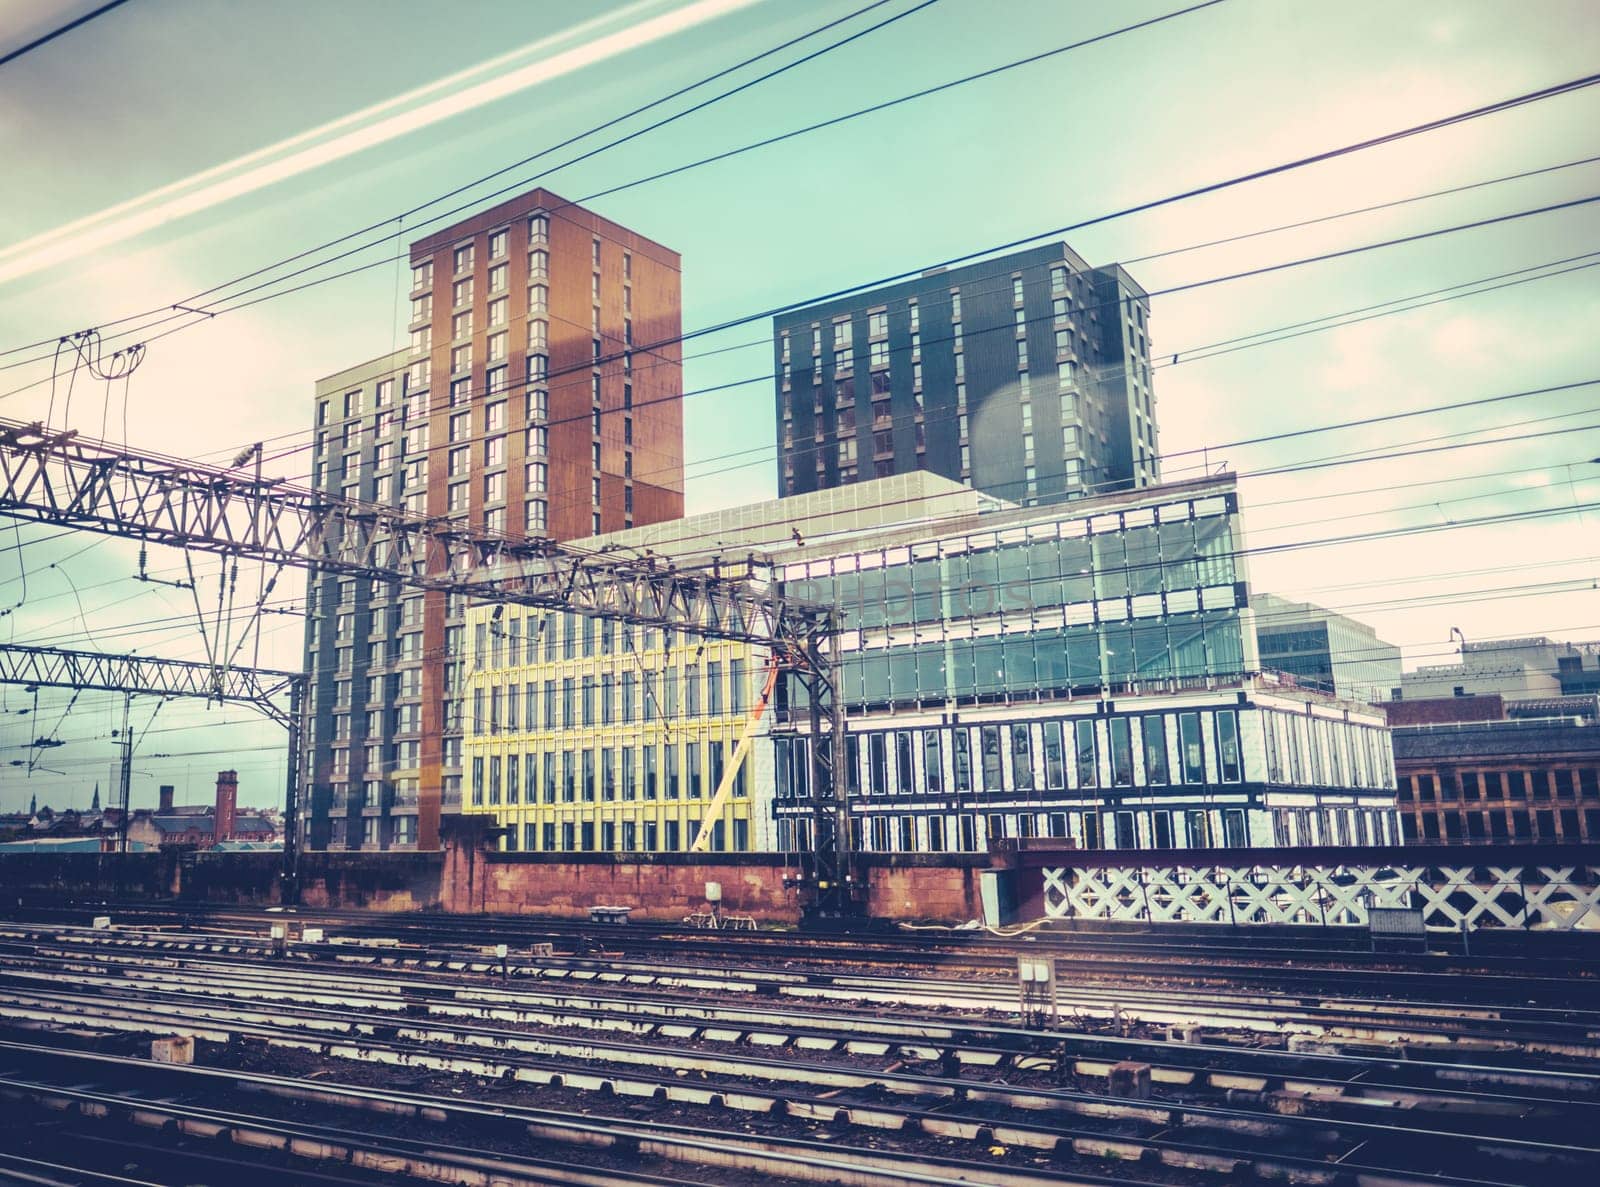 Chaotic Urban Landscape Through A Train Window, WIth Reflections